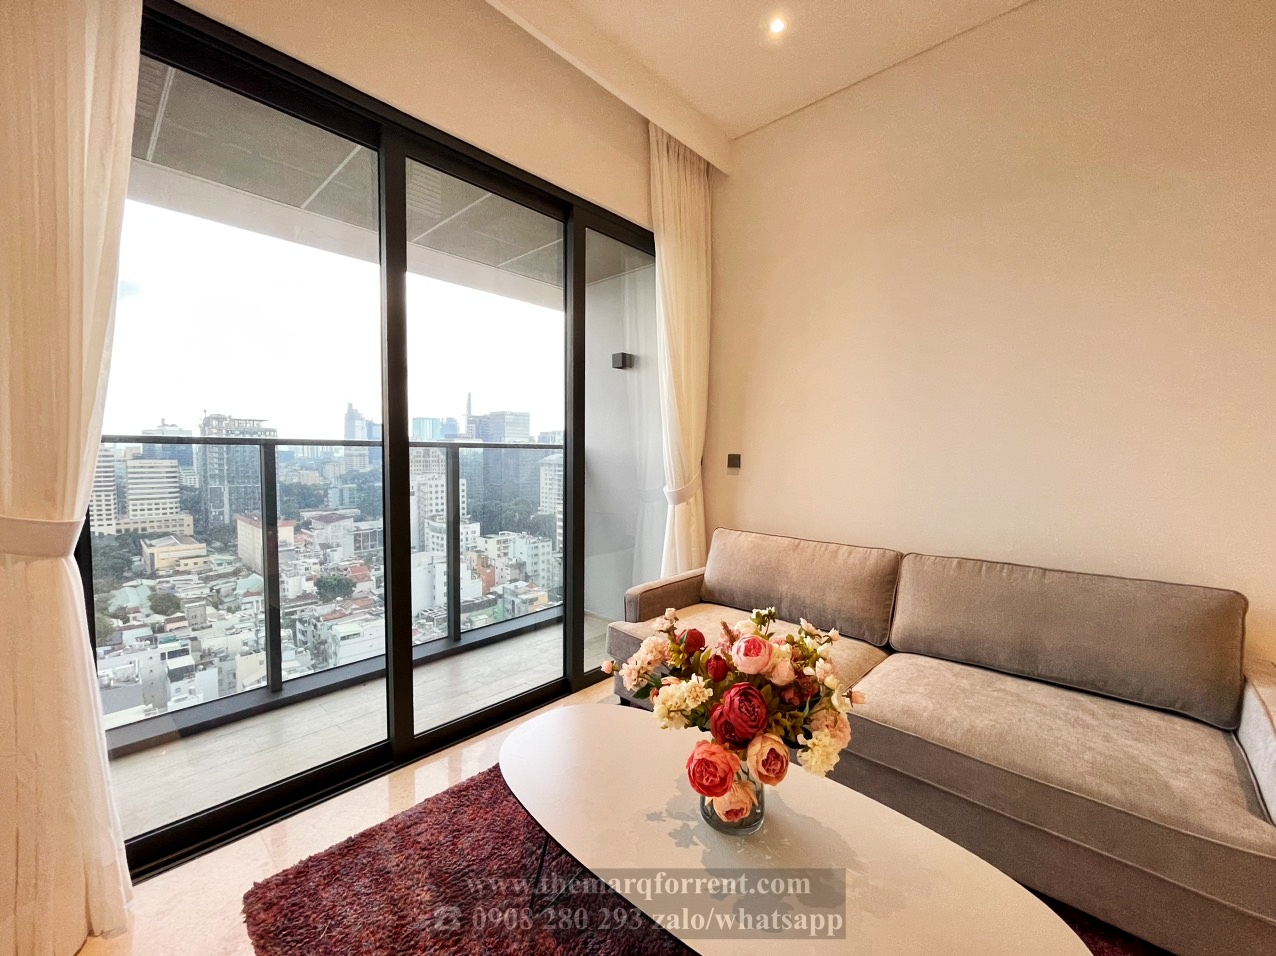 3br apartment for sale in The Marq District 1 with full modern furniture